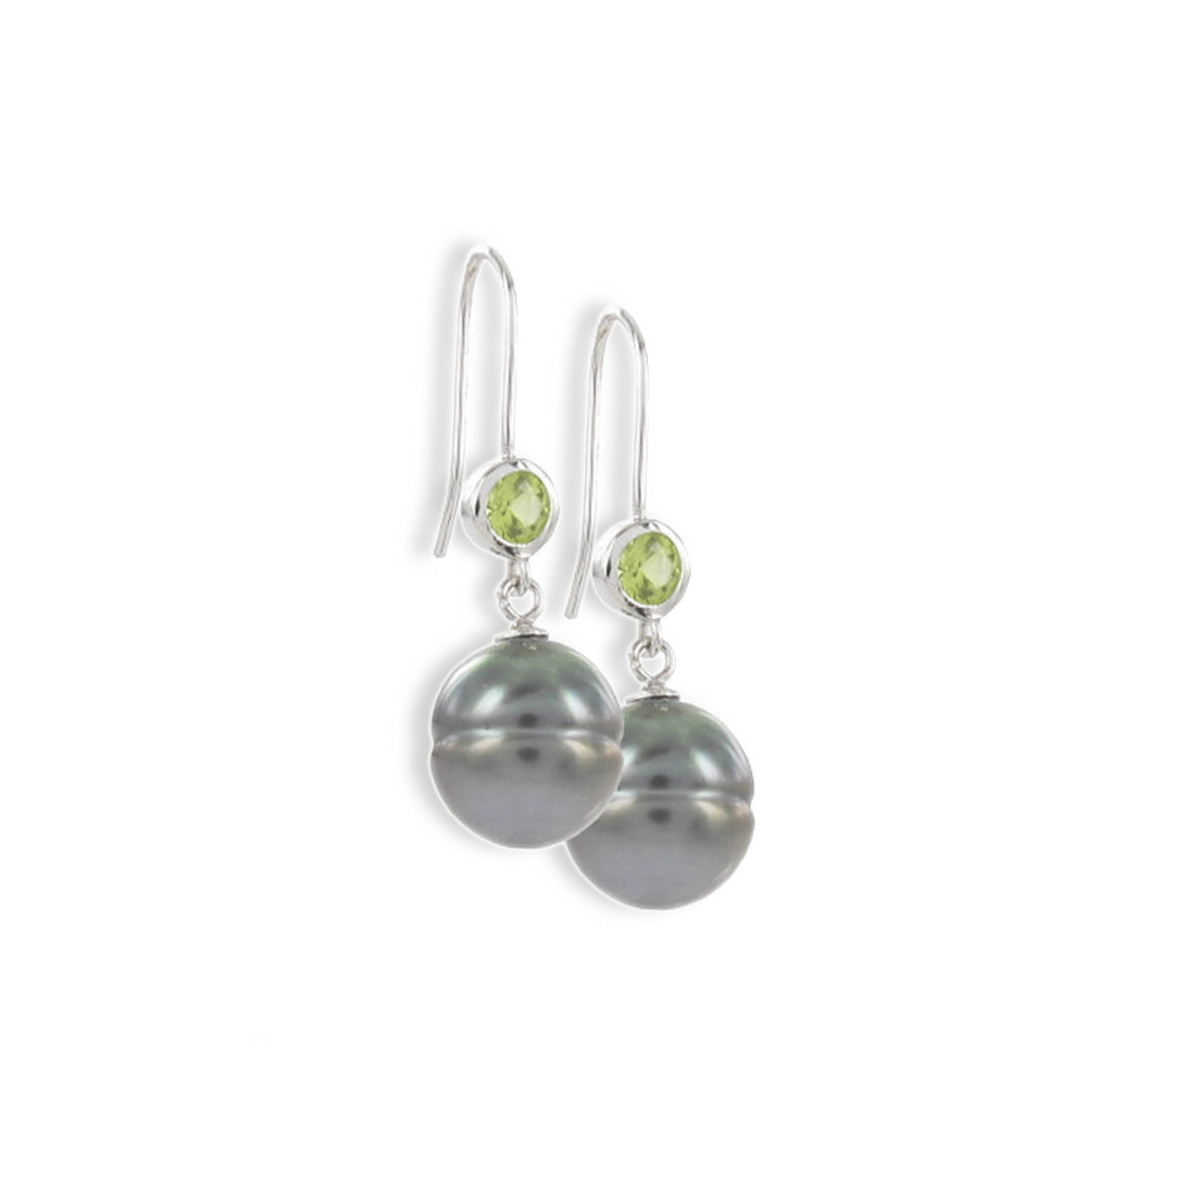 STERLING SILVER PERIDOT AND PEARL